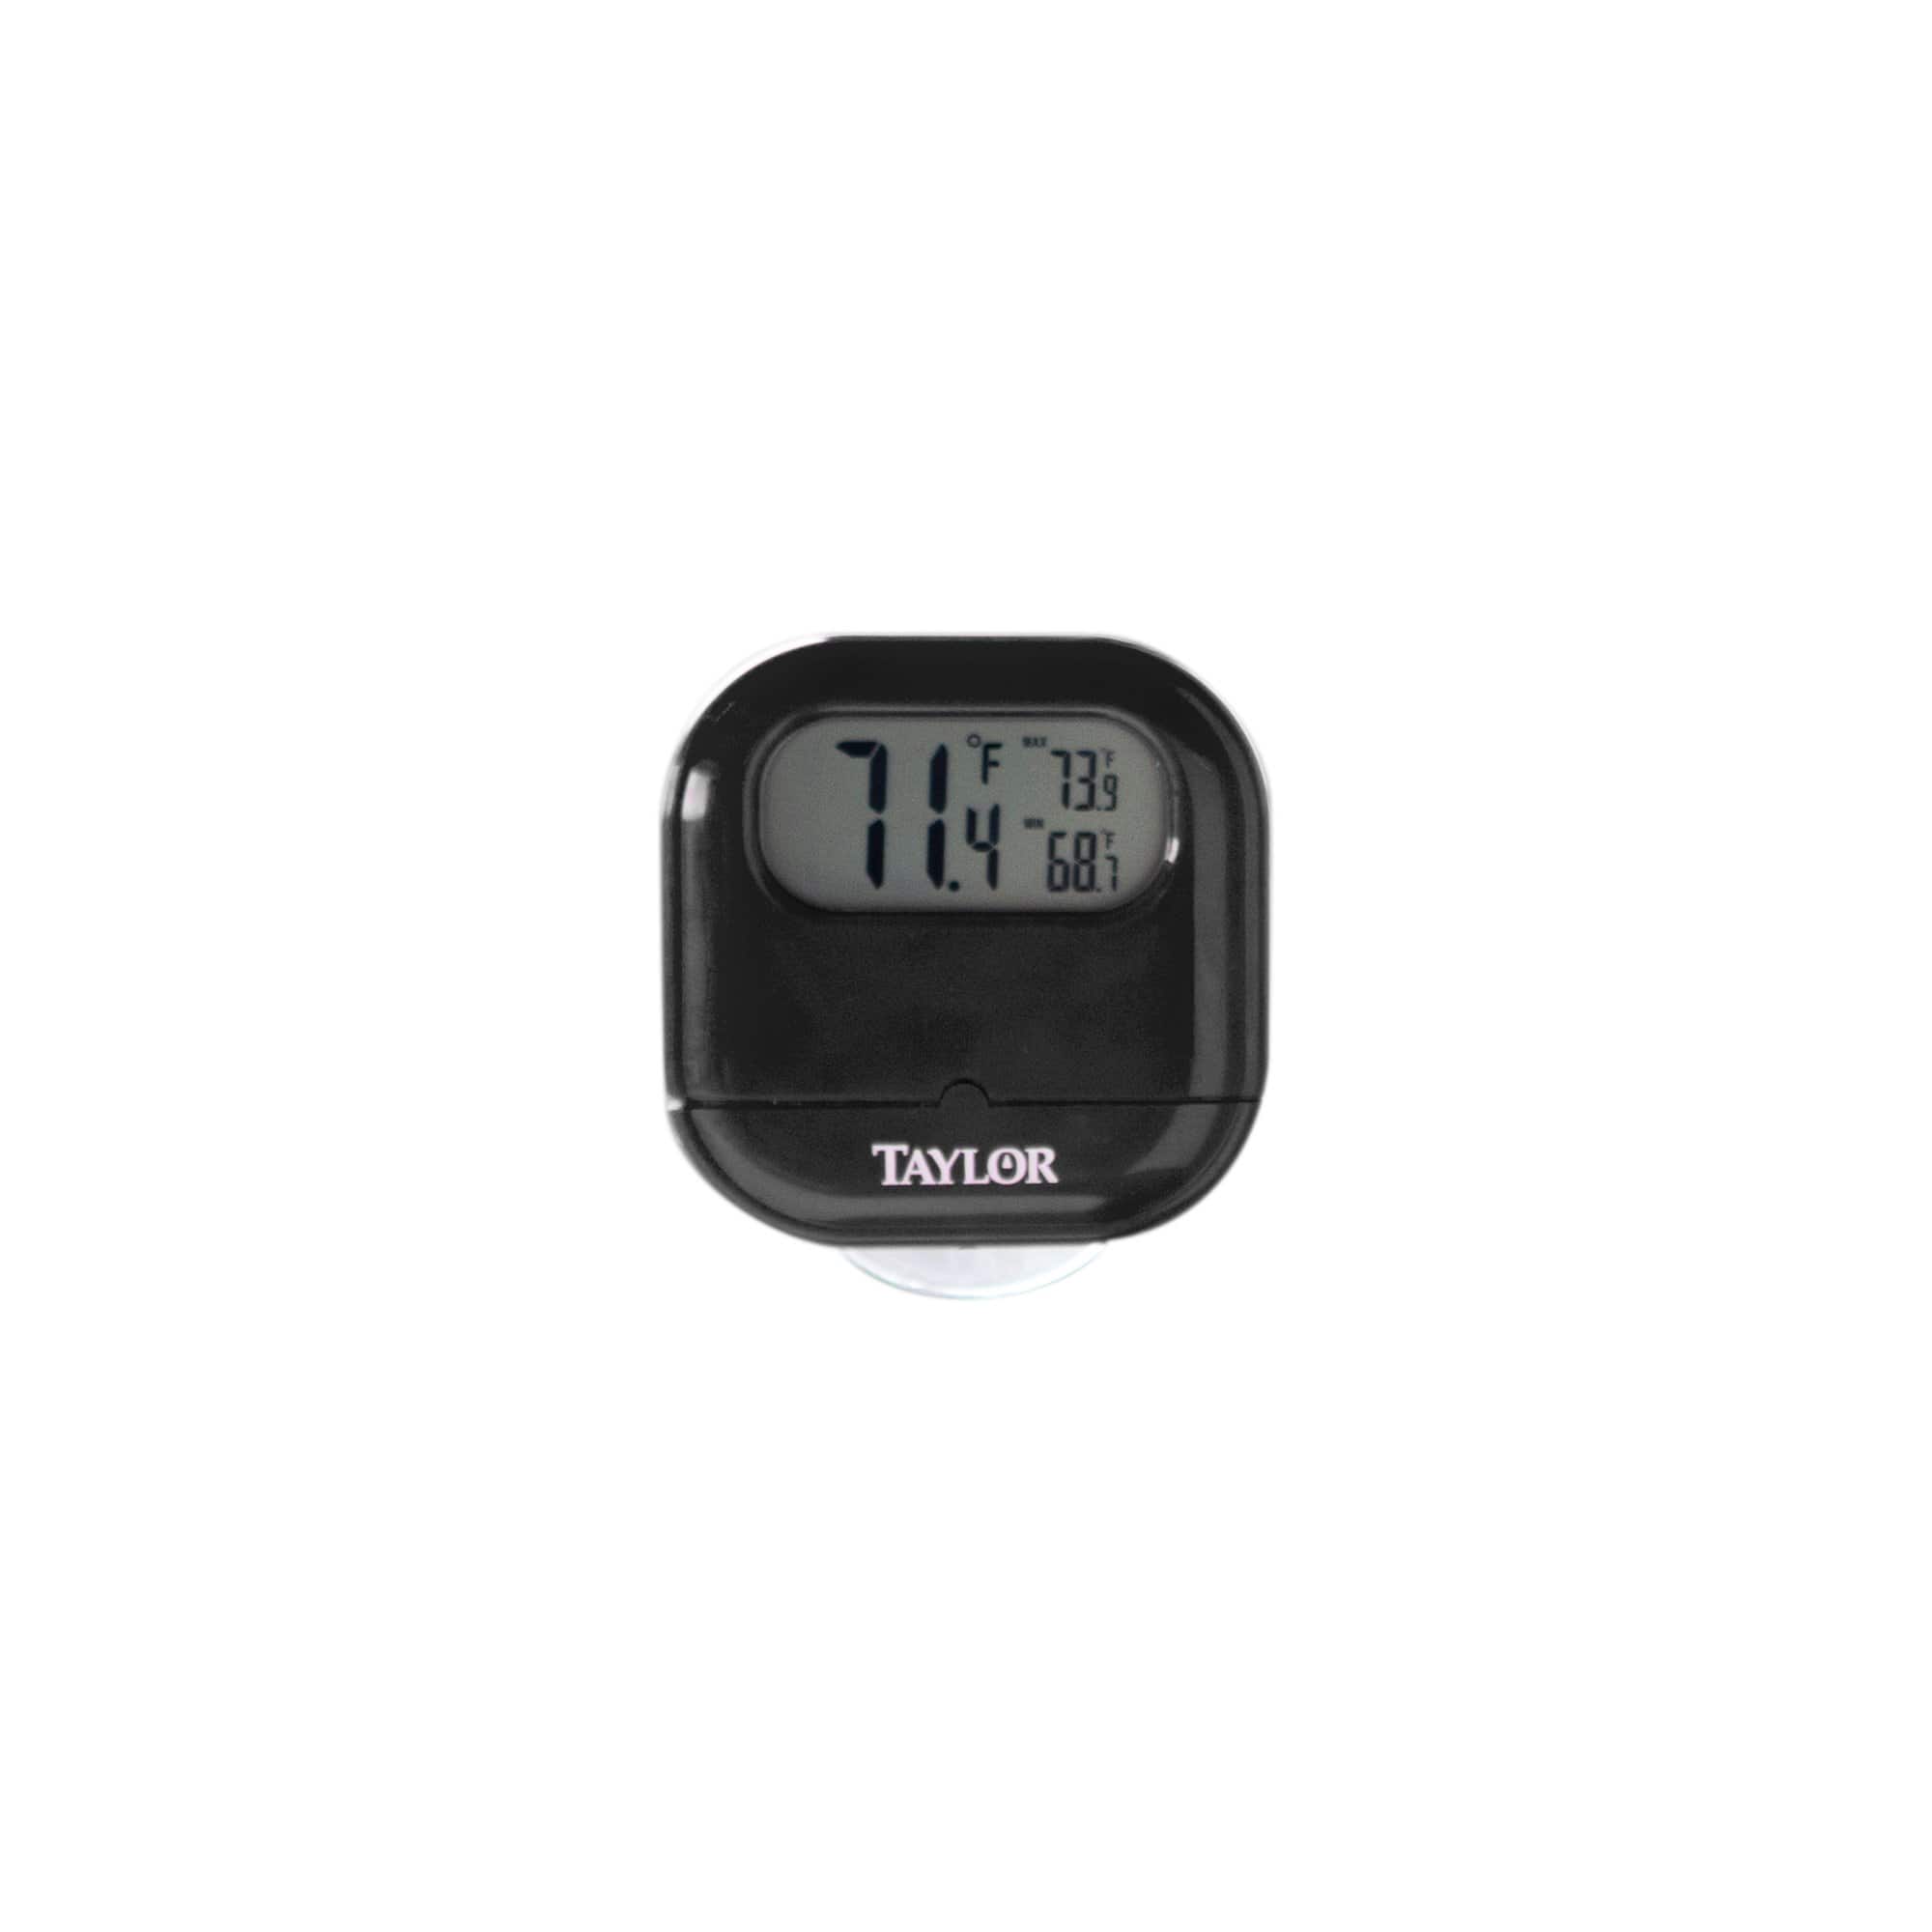 Taylor - Digital Wireless Indoor & Outdoor Thermometer